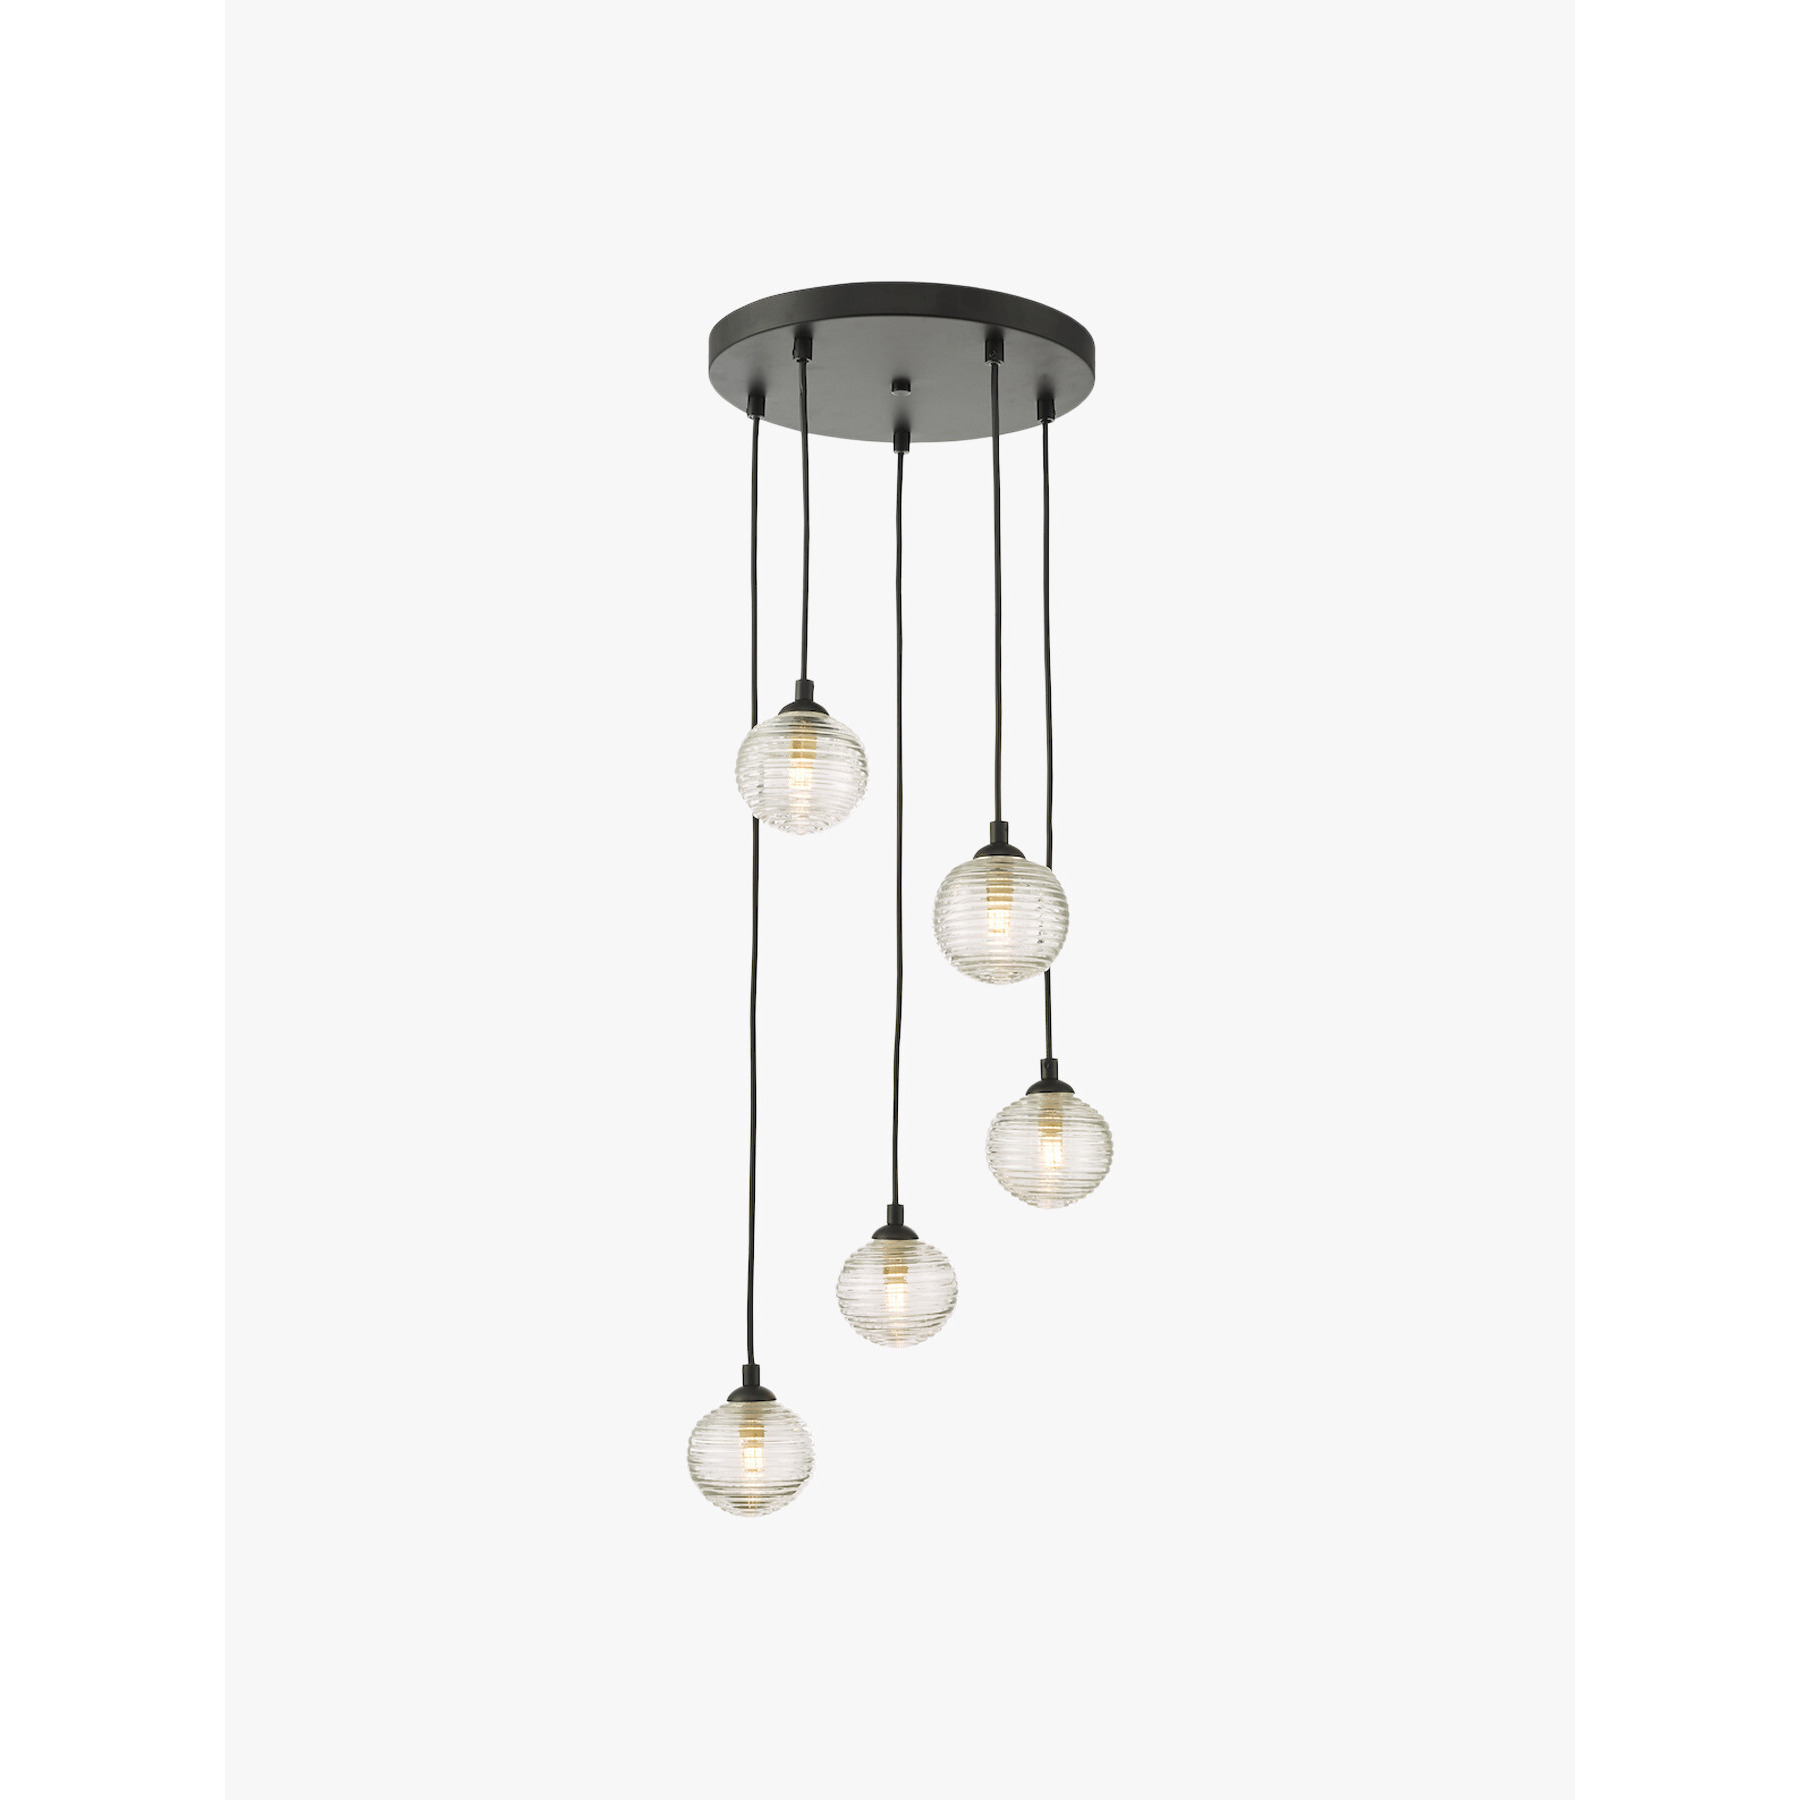 Dar Lighting Federico 5 Light Cluster Pendant - Polished Chrome and Clear Ribbed Glass Silver - image 1